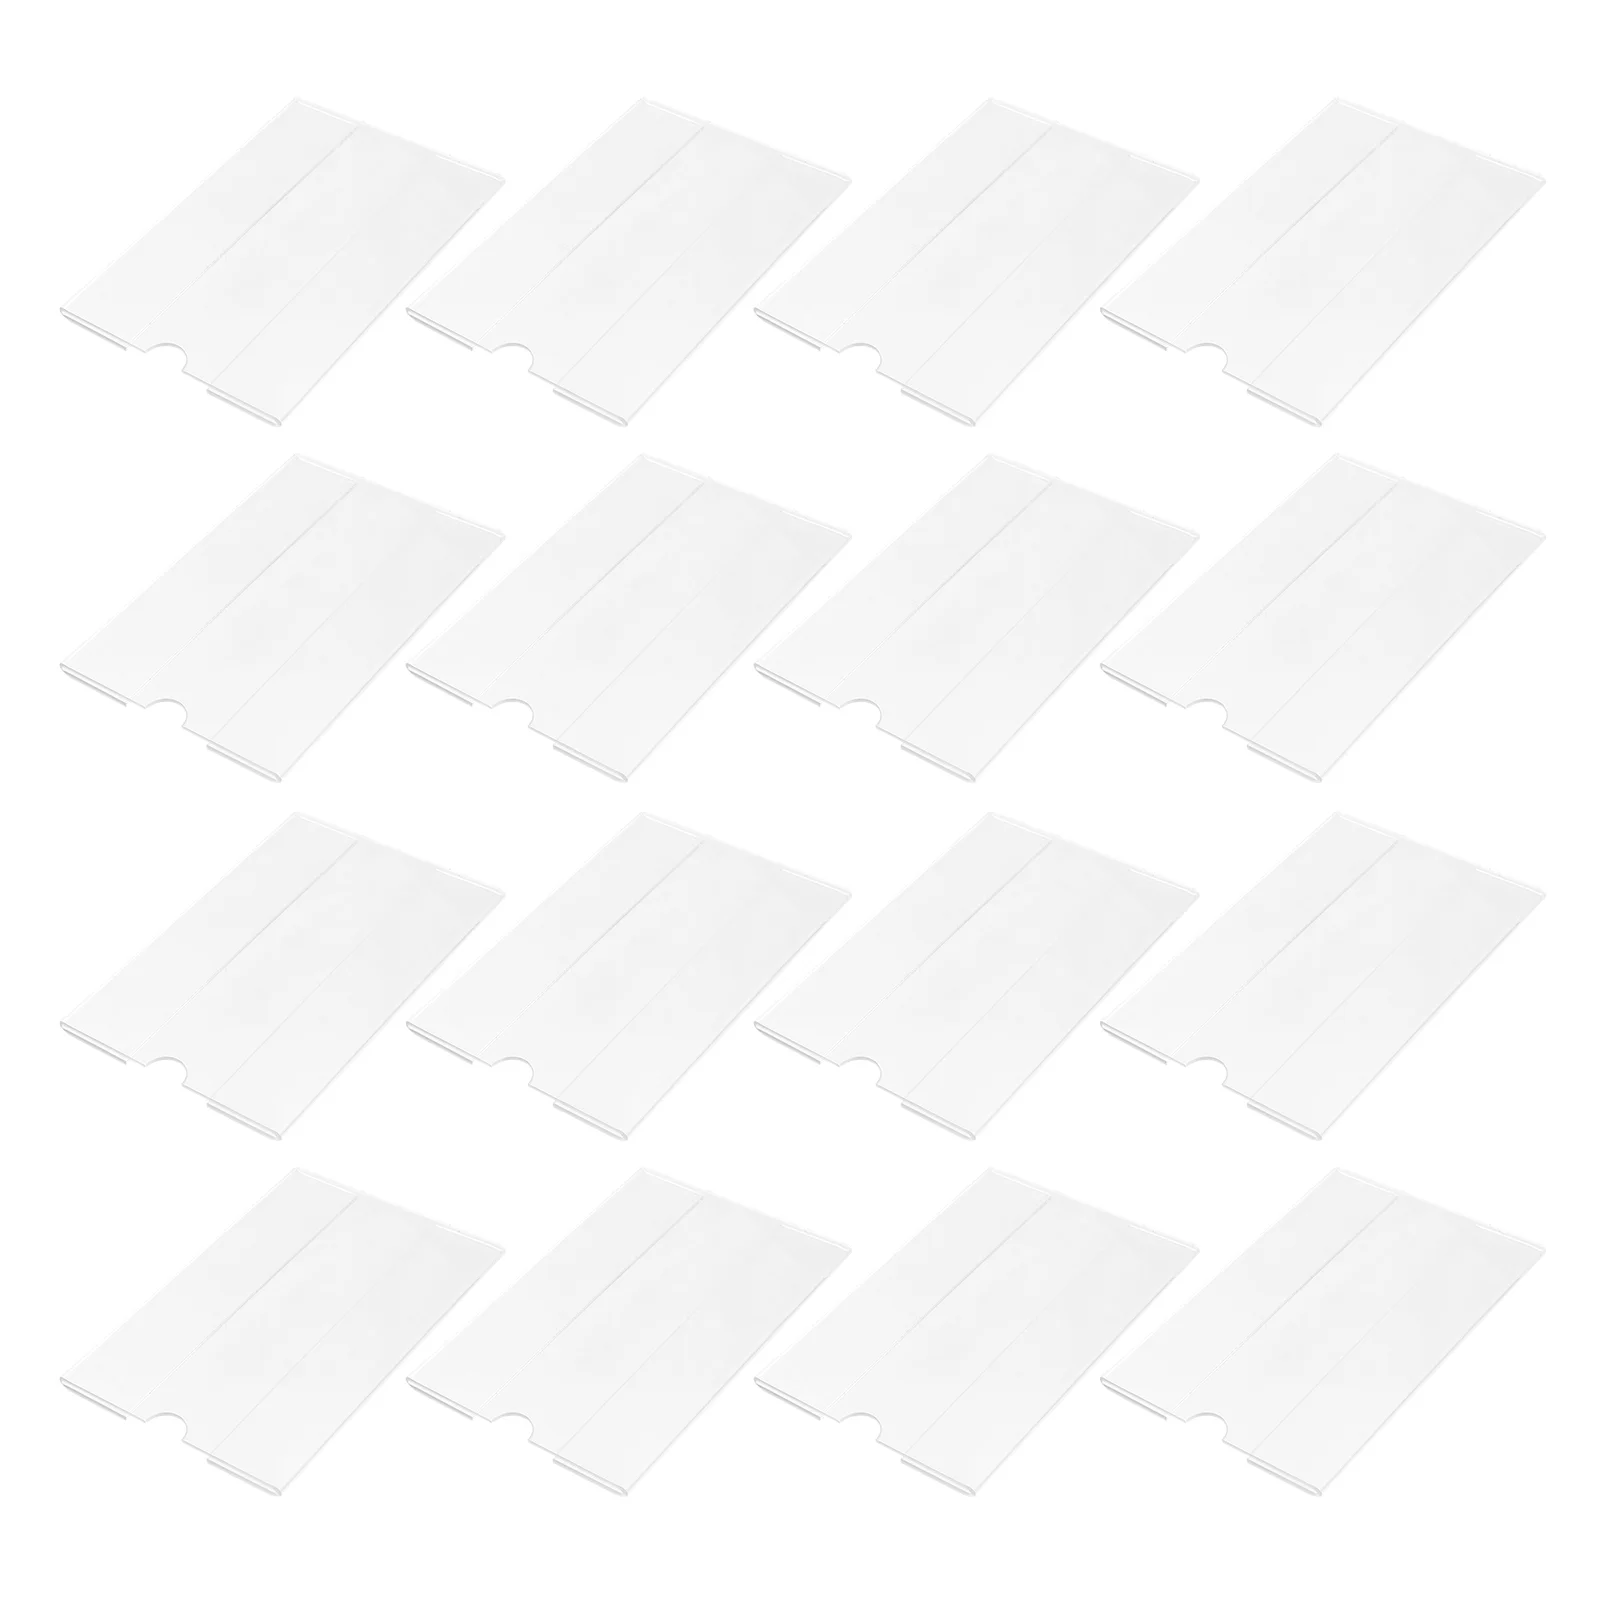 

30 Pcs Price Tag Retail Plastic Baskets Shelf Display Wall Mount Label Acrylic Shop Clear Office Magnetic